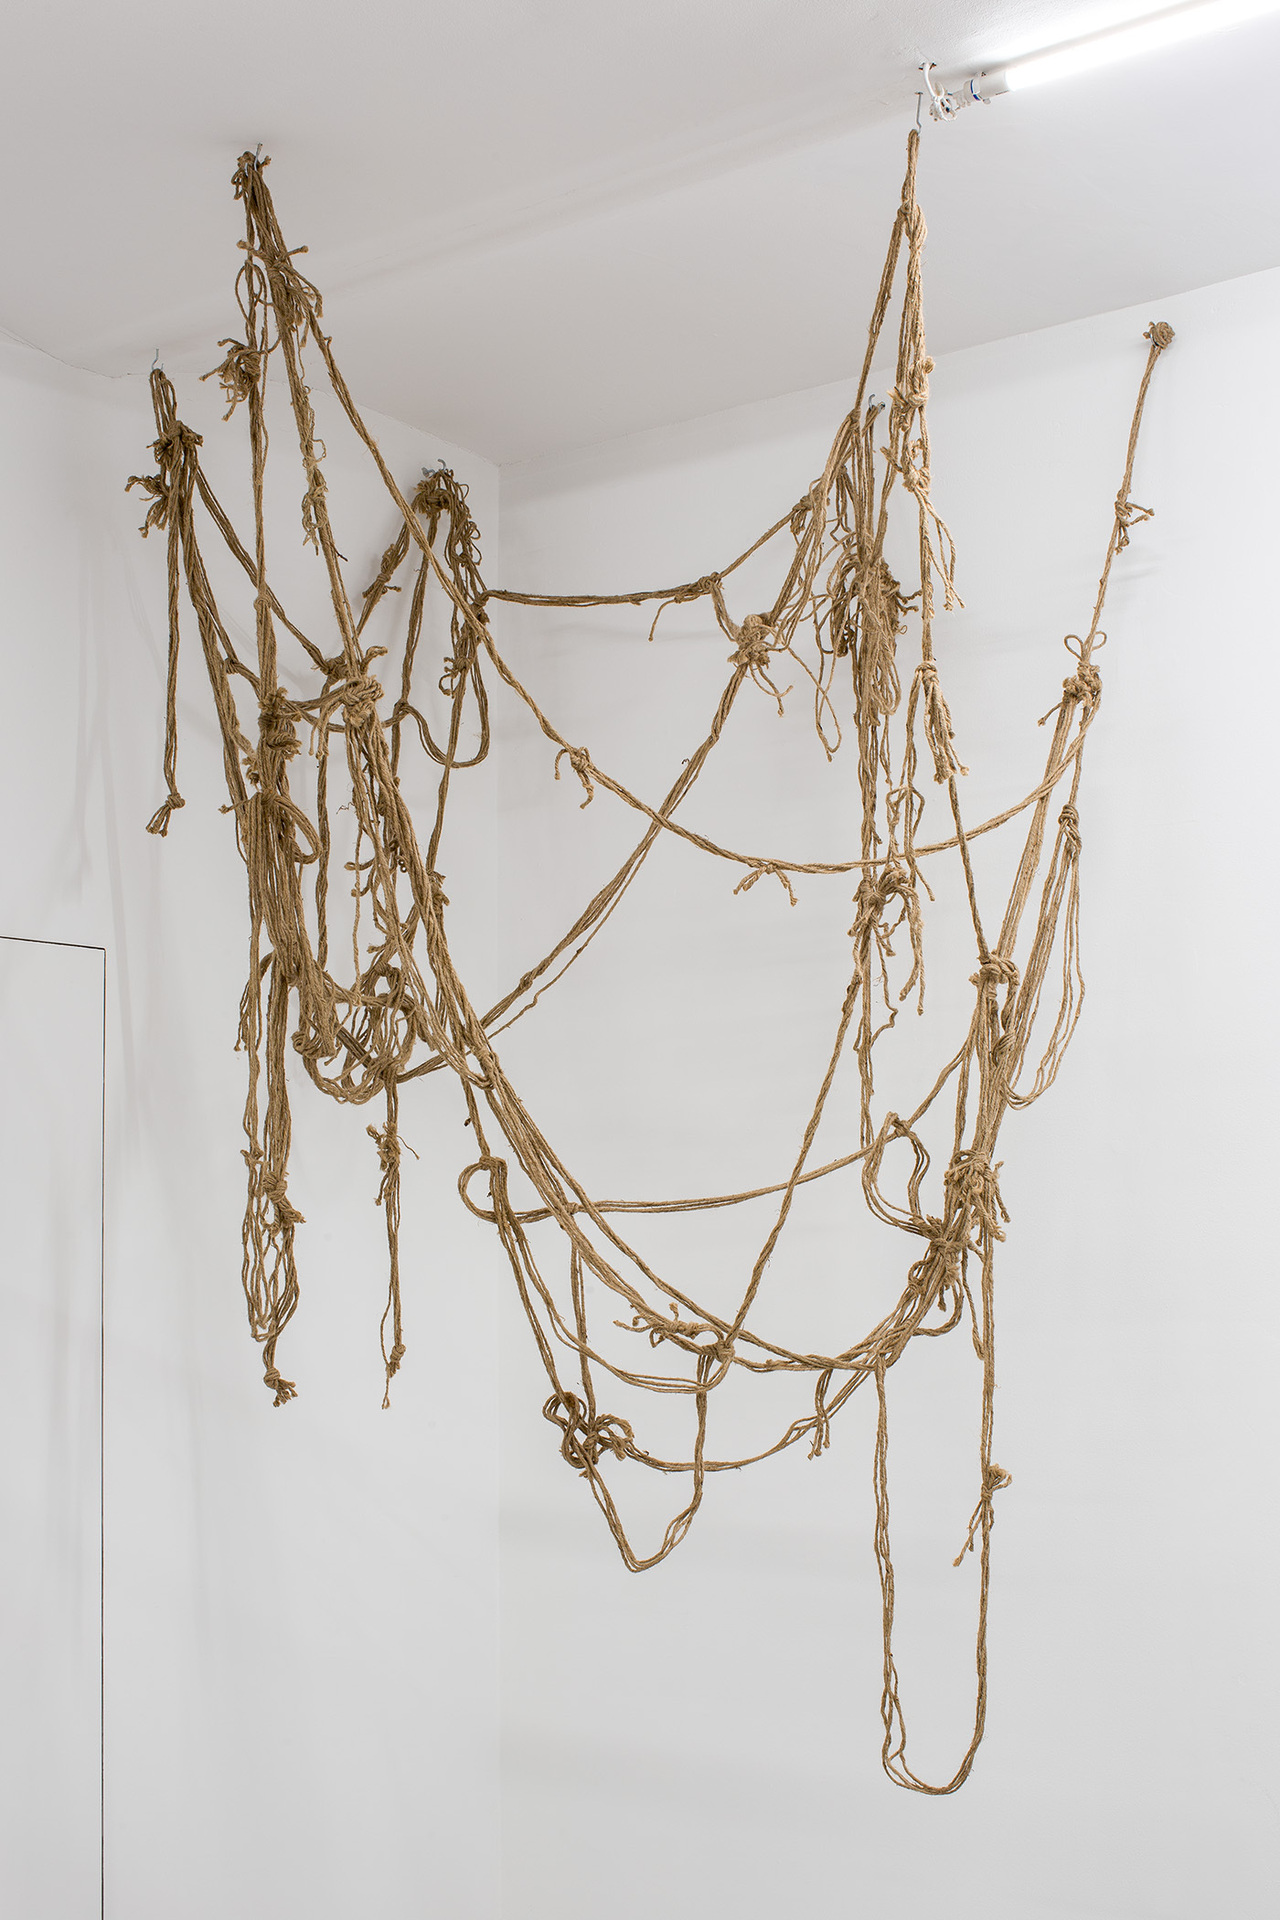 A-W, “unknown”, rope.